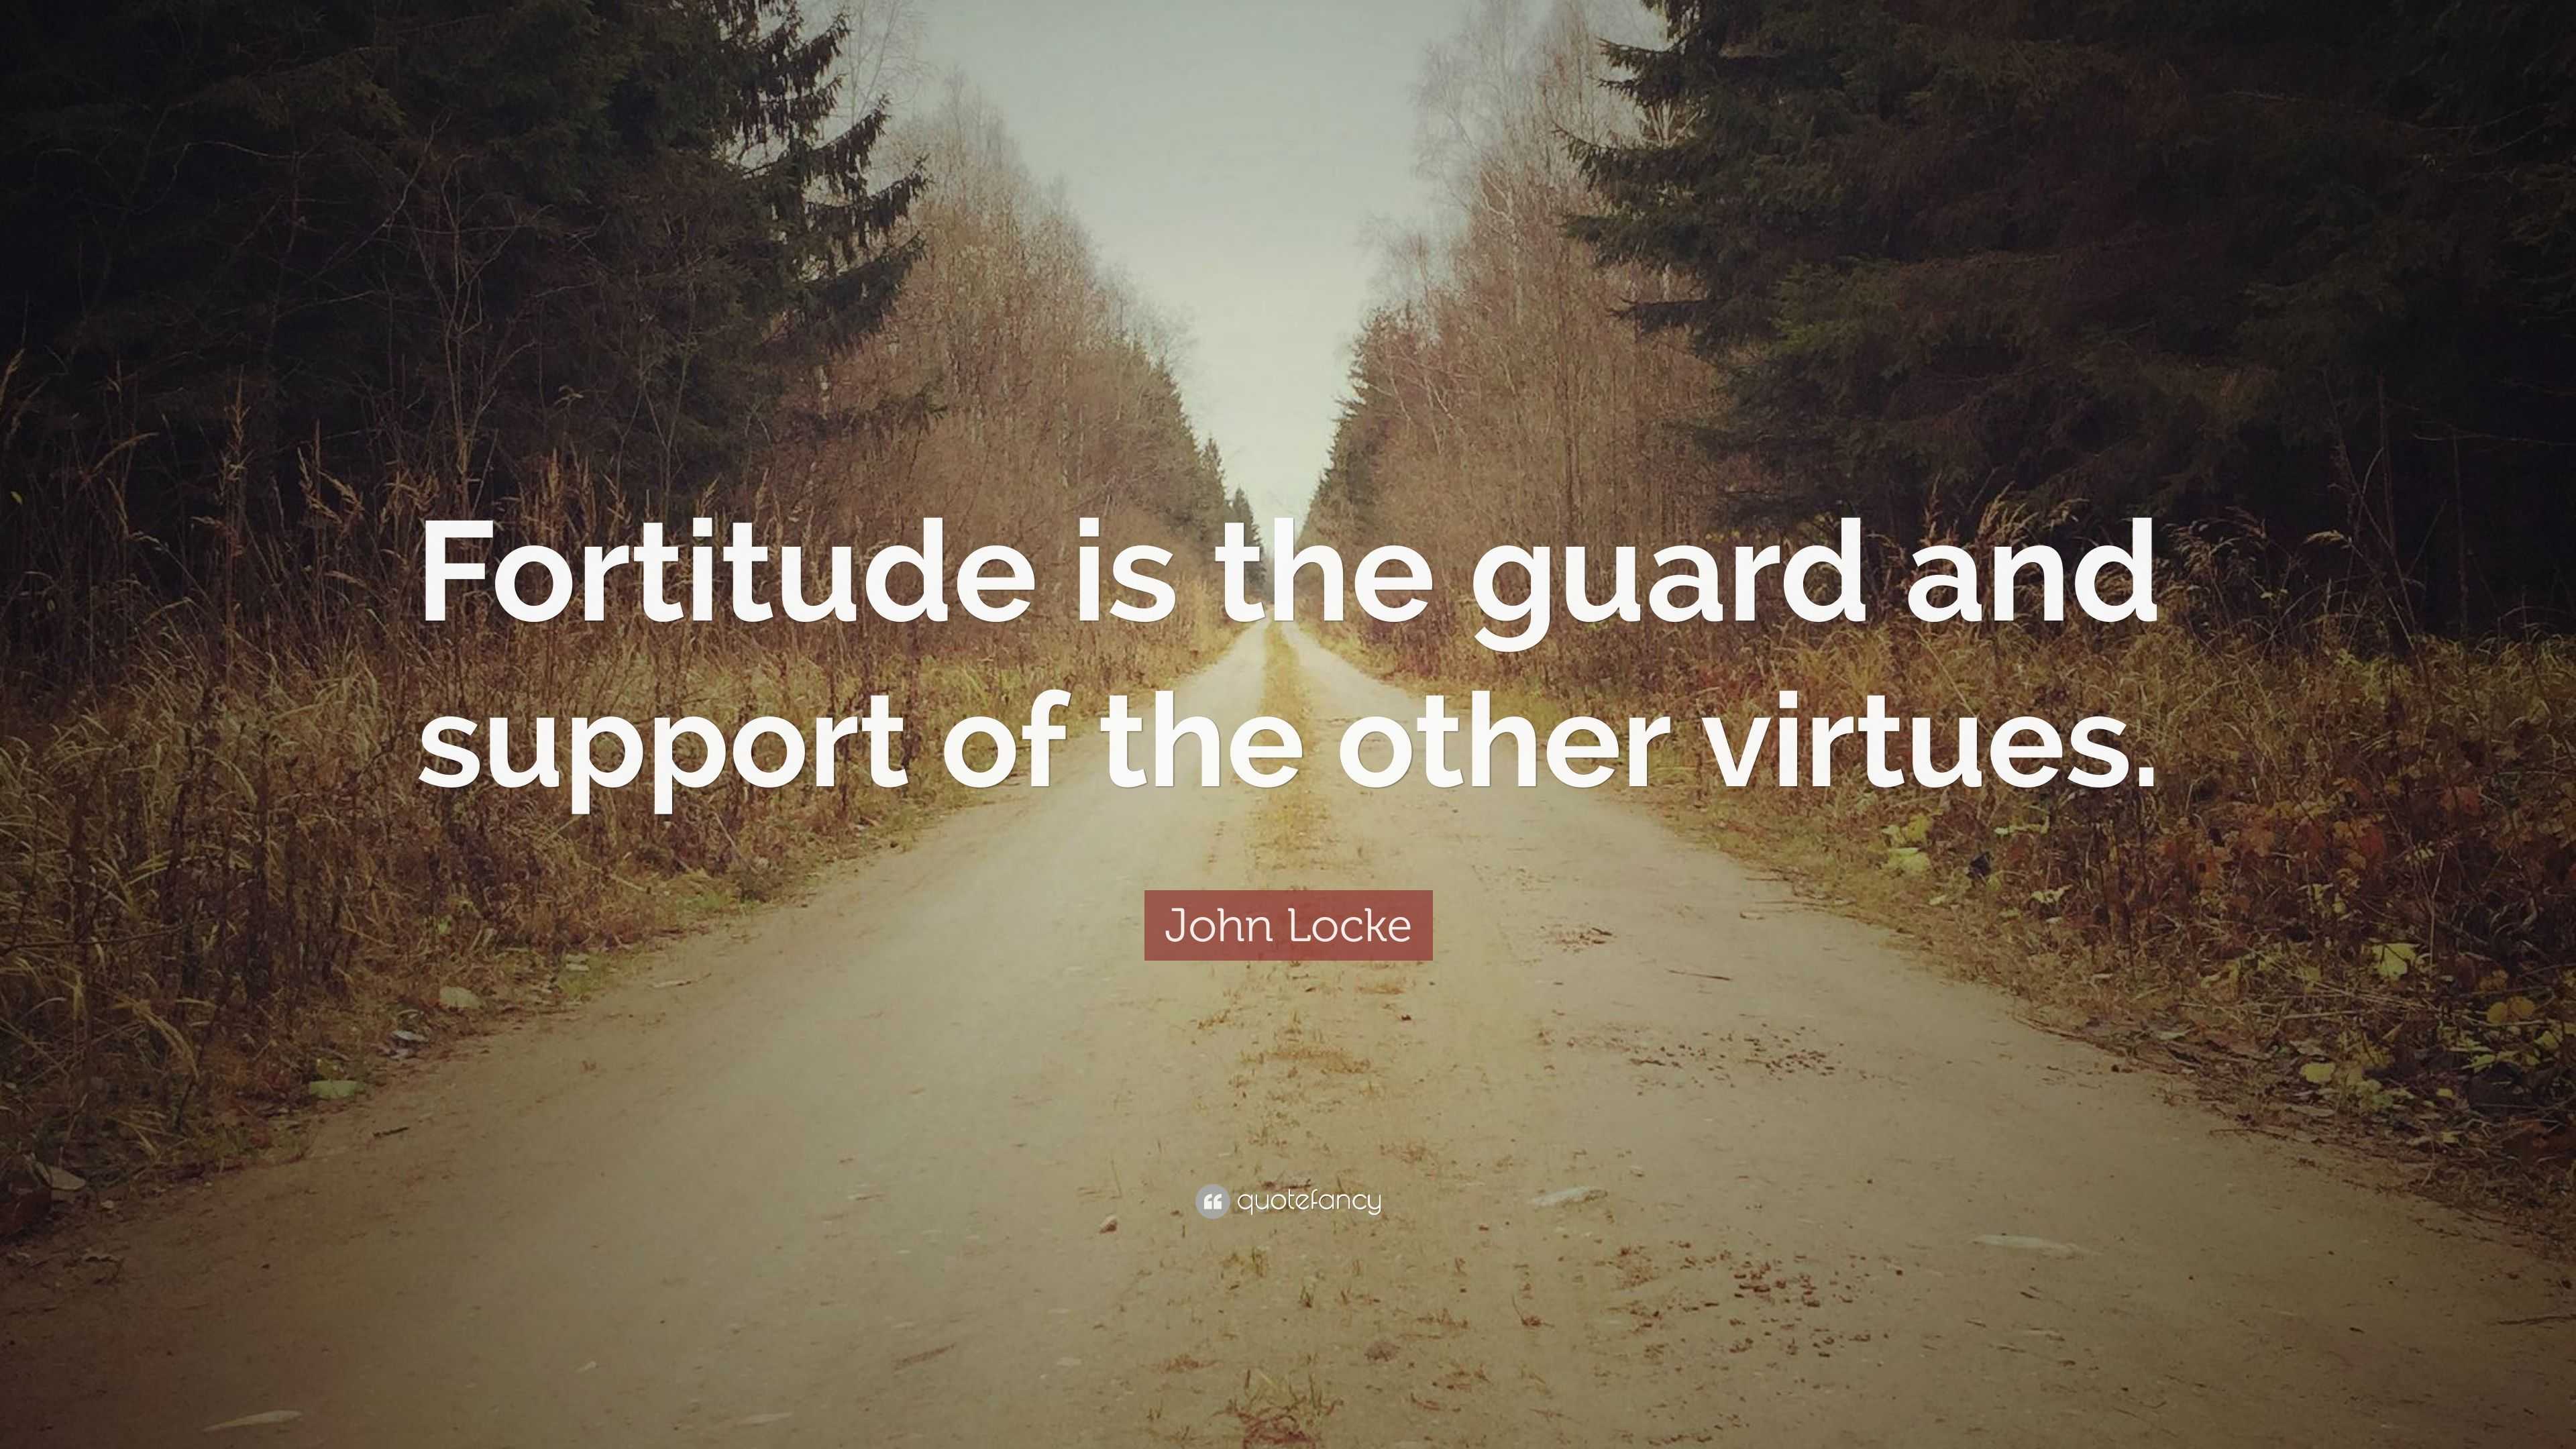 John Locke Quote: "Fortitude is the guard and support of the other virtues." (12 wallpapers ...